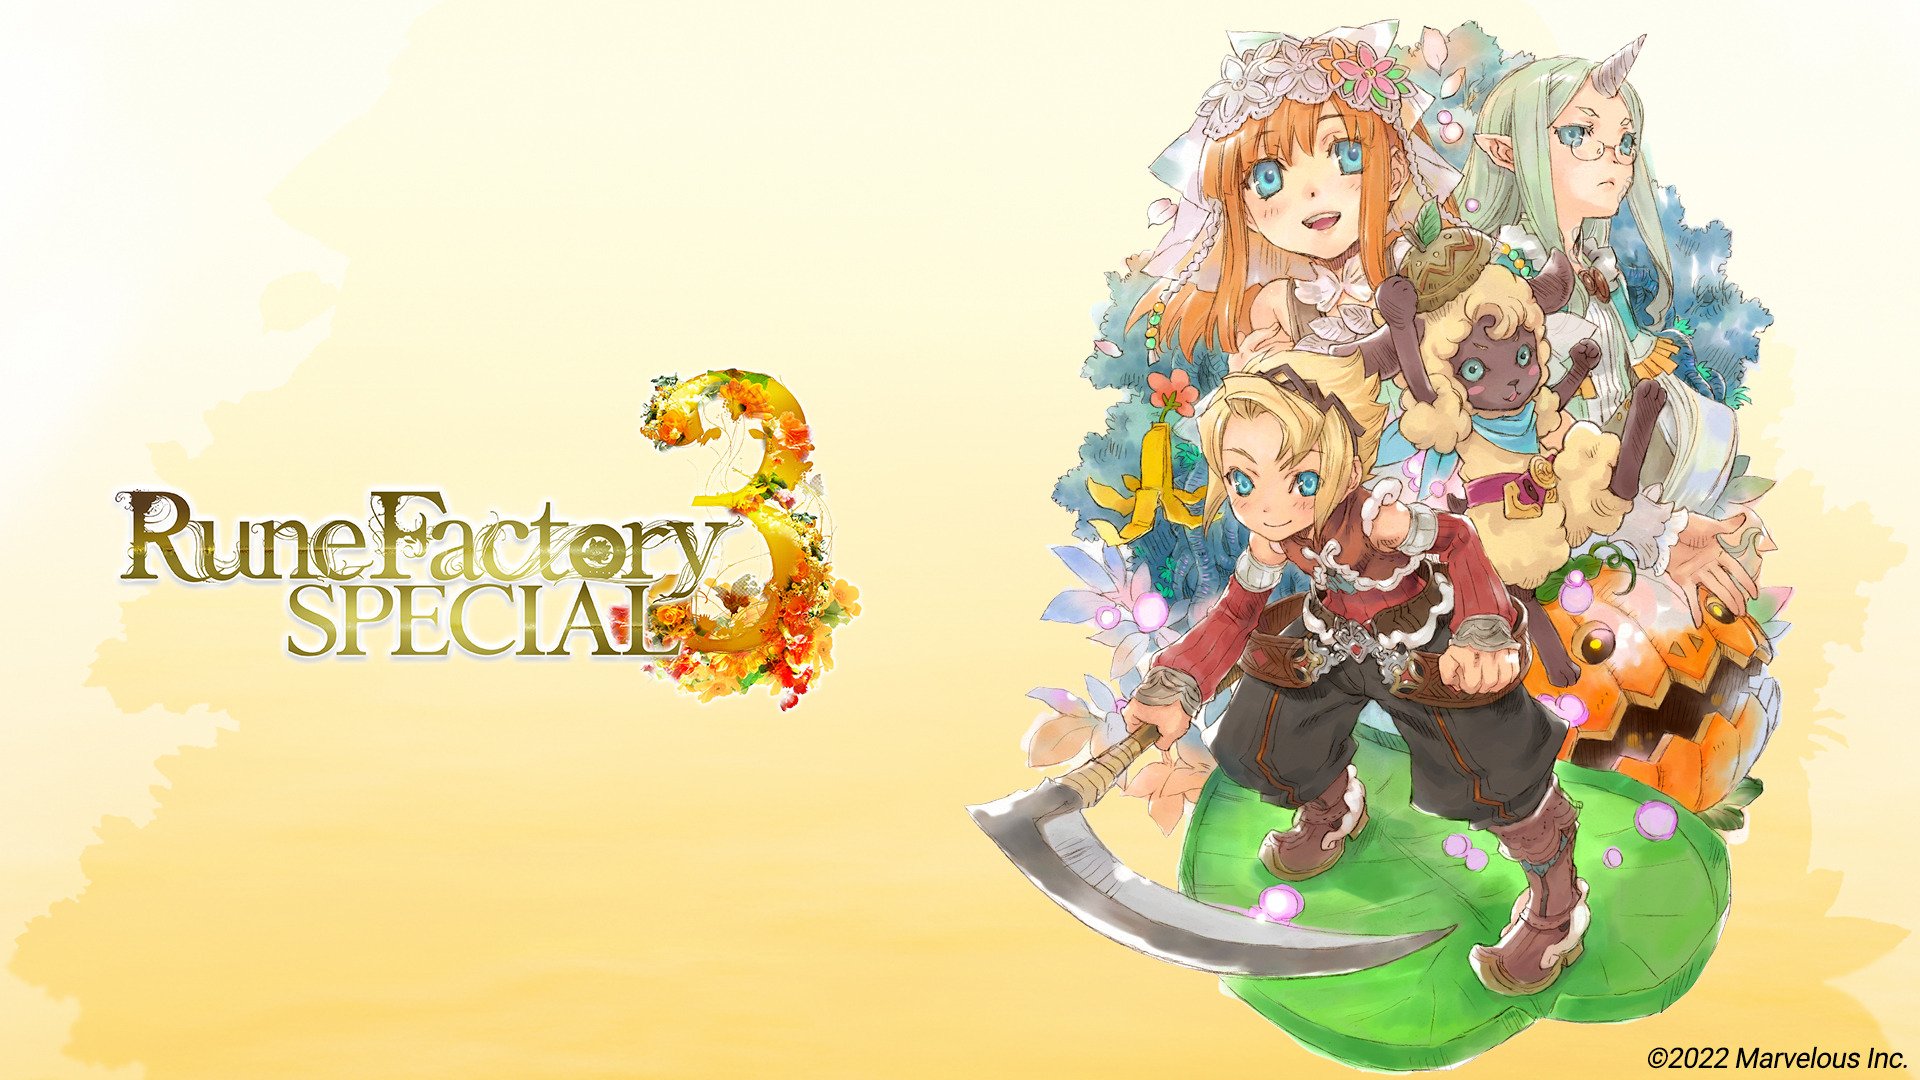 #
      Rune Factory 3 Special launches September 5 in the west for Switch, PC